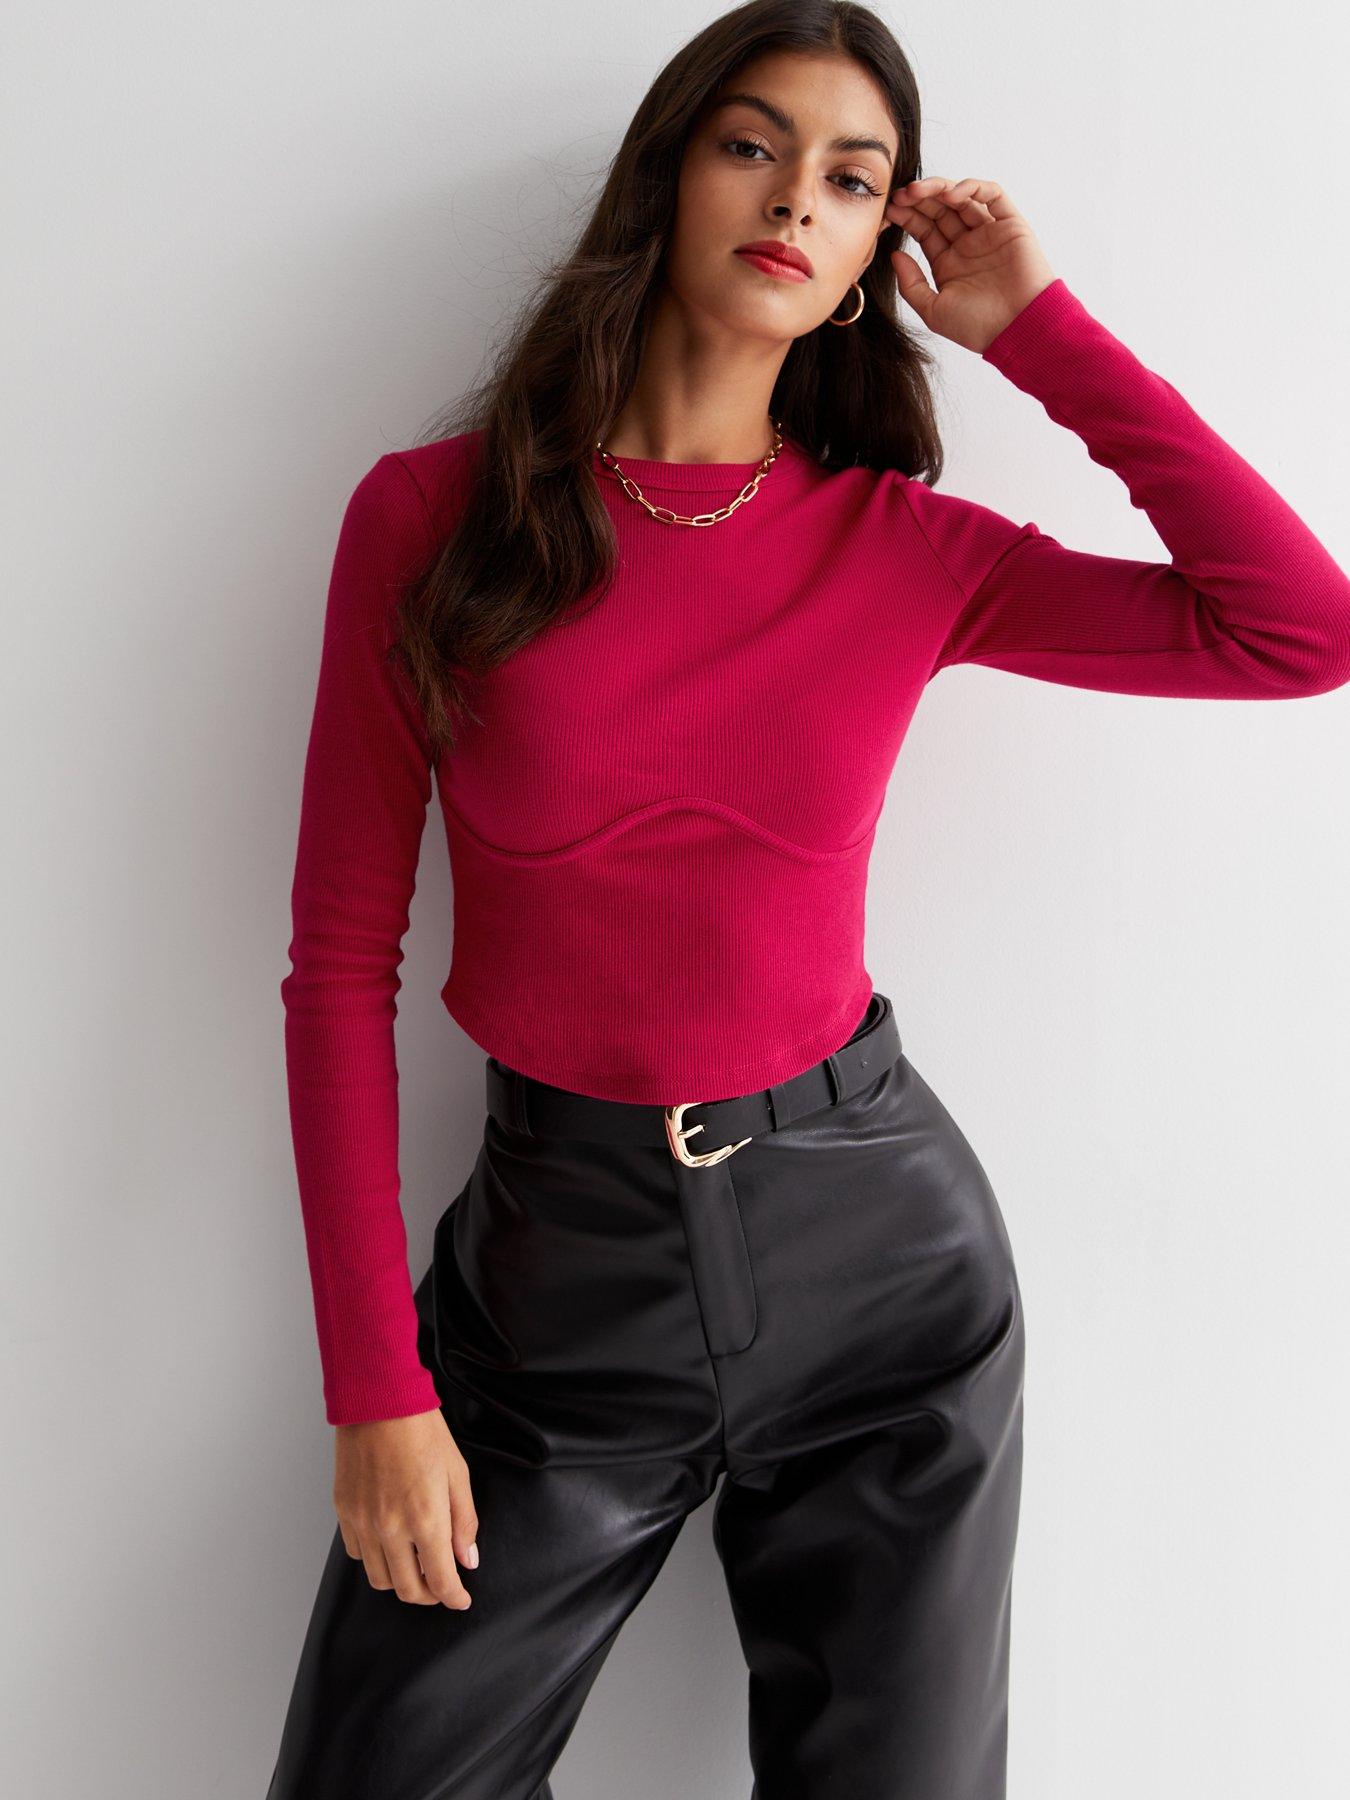 New Look Bright Pink Corset Bust Seamed Long Sleeve Top